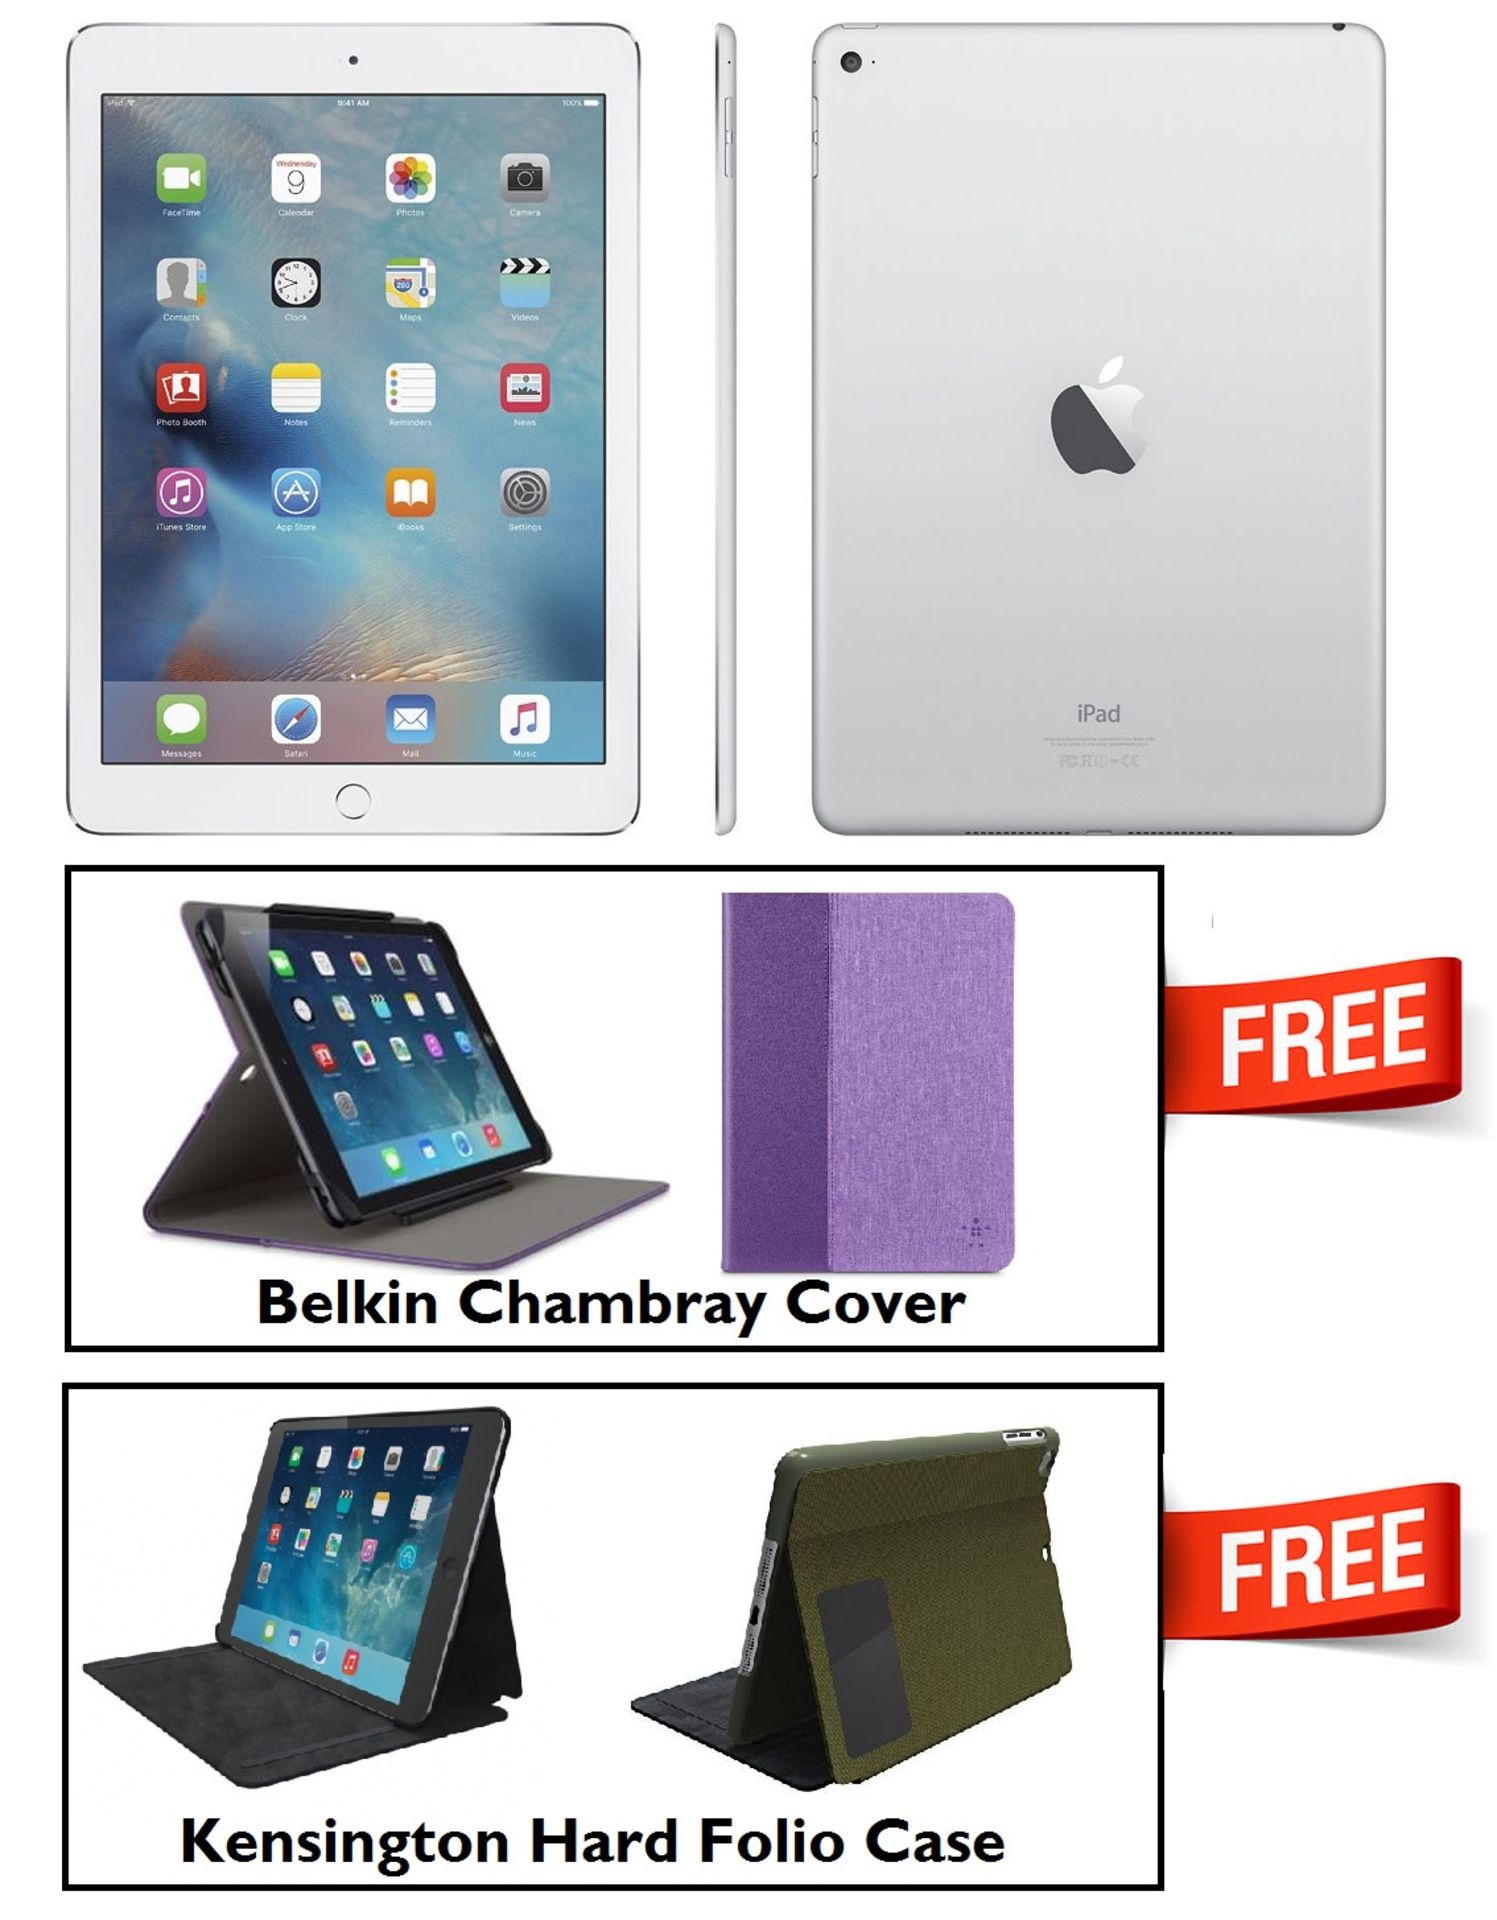 V Grade A/B Apple iPad Air 16Gb - Wi-Fi - Silver/White - Unlocked with Charging Cable - Comes With